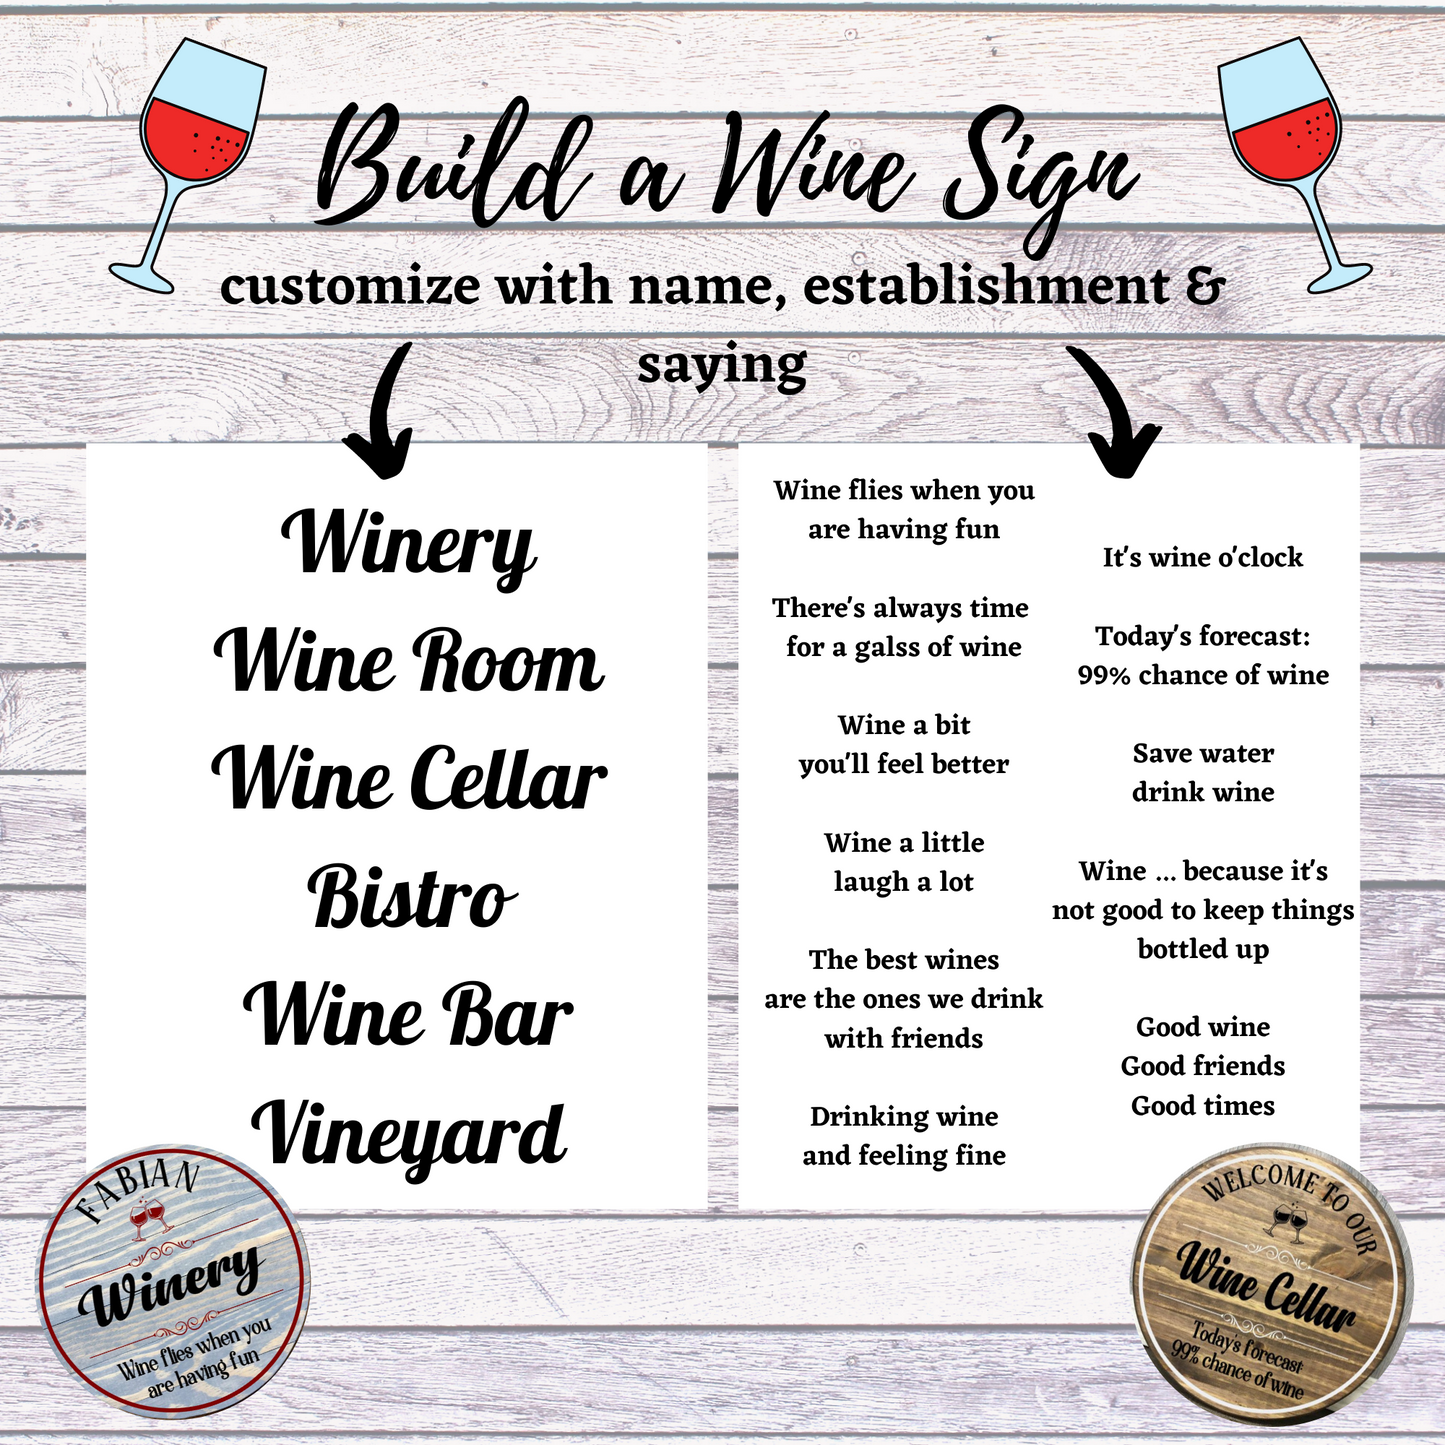 Hammer at Home BUILD A WINE SIGN TAKE HOME KIT